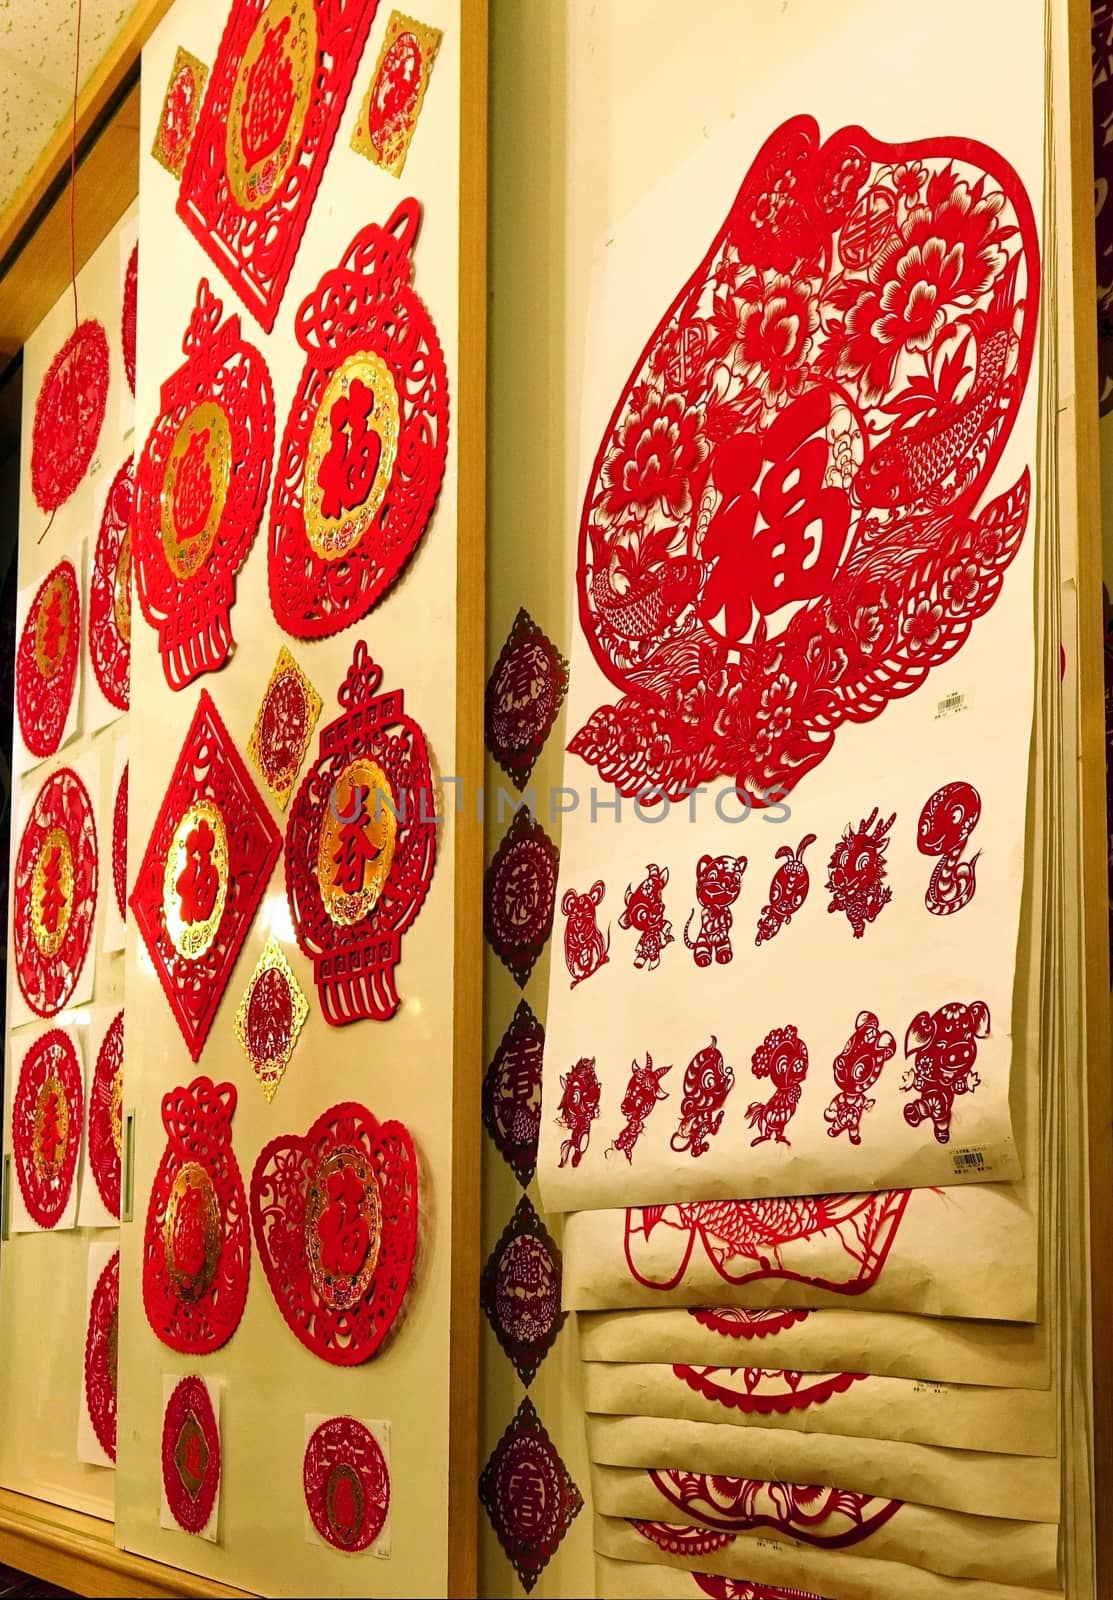 KAOHSIUNG, TAIWAN -- JANUARY 22, 2015: A store sells bright red paper cuts and printed couplets and proverbs for the Chinese New Year.